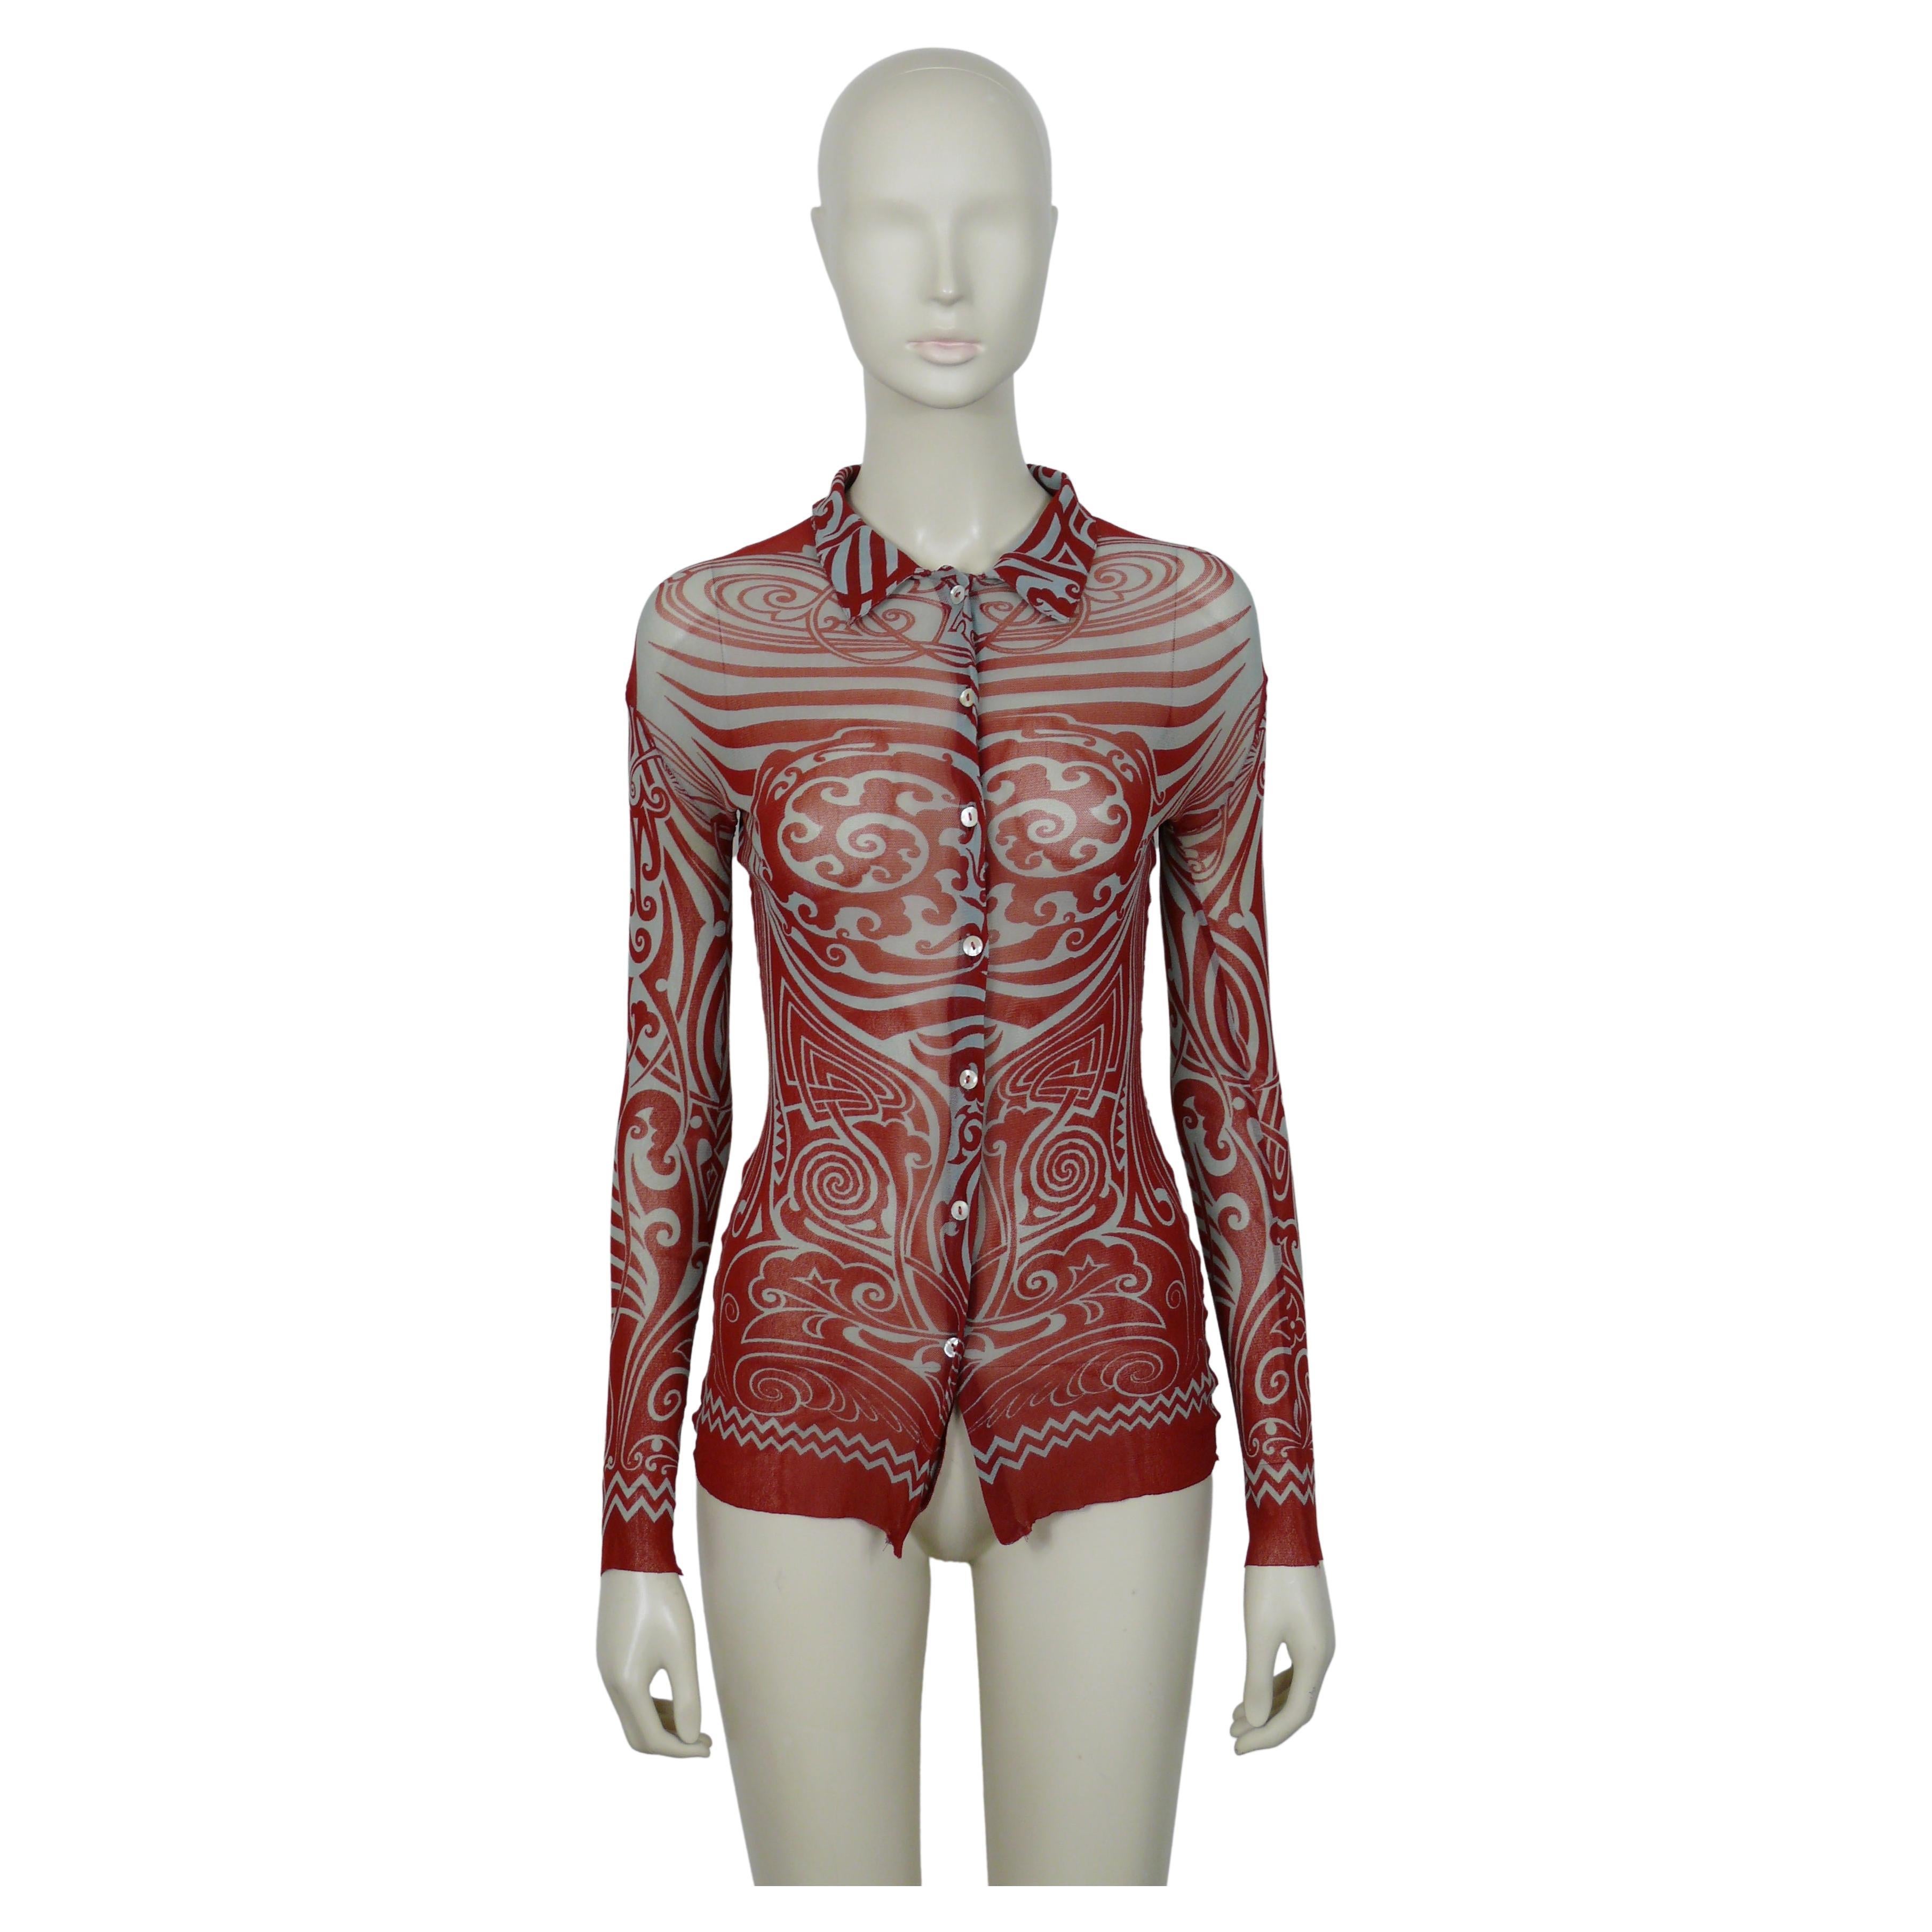 Jean Paul Gaultier Vintage 1996 Iconic Tribal Tattoo Print Mesh Shirt For Sale